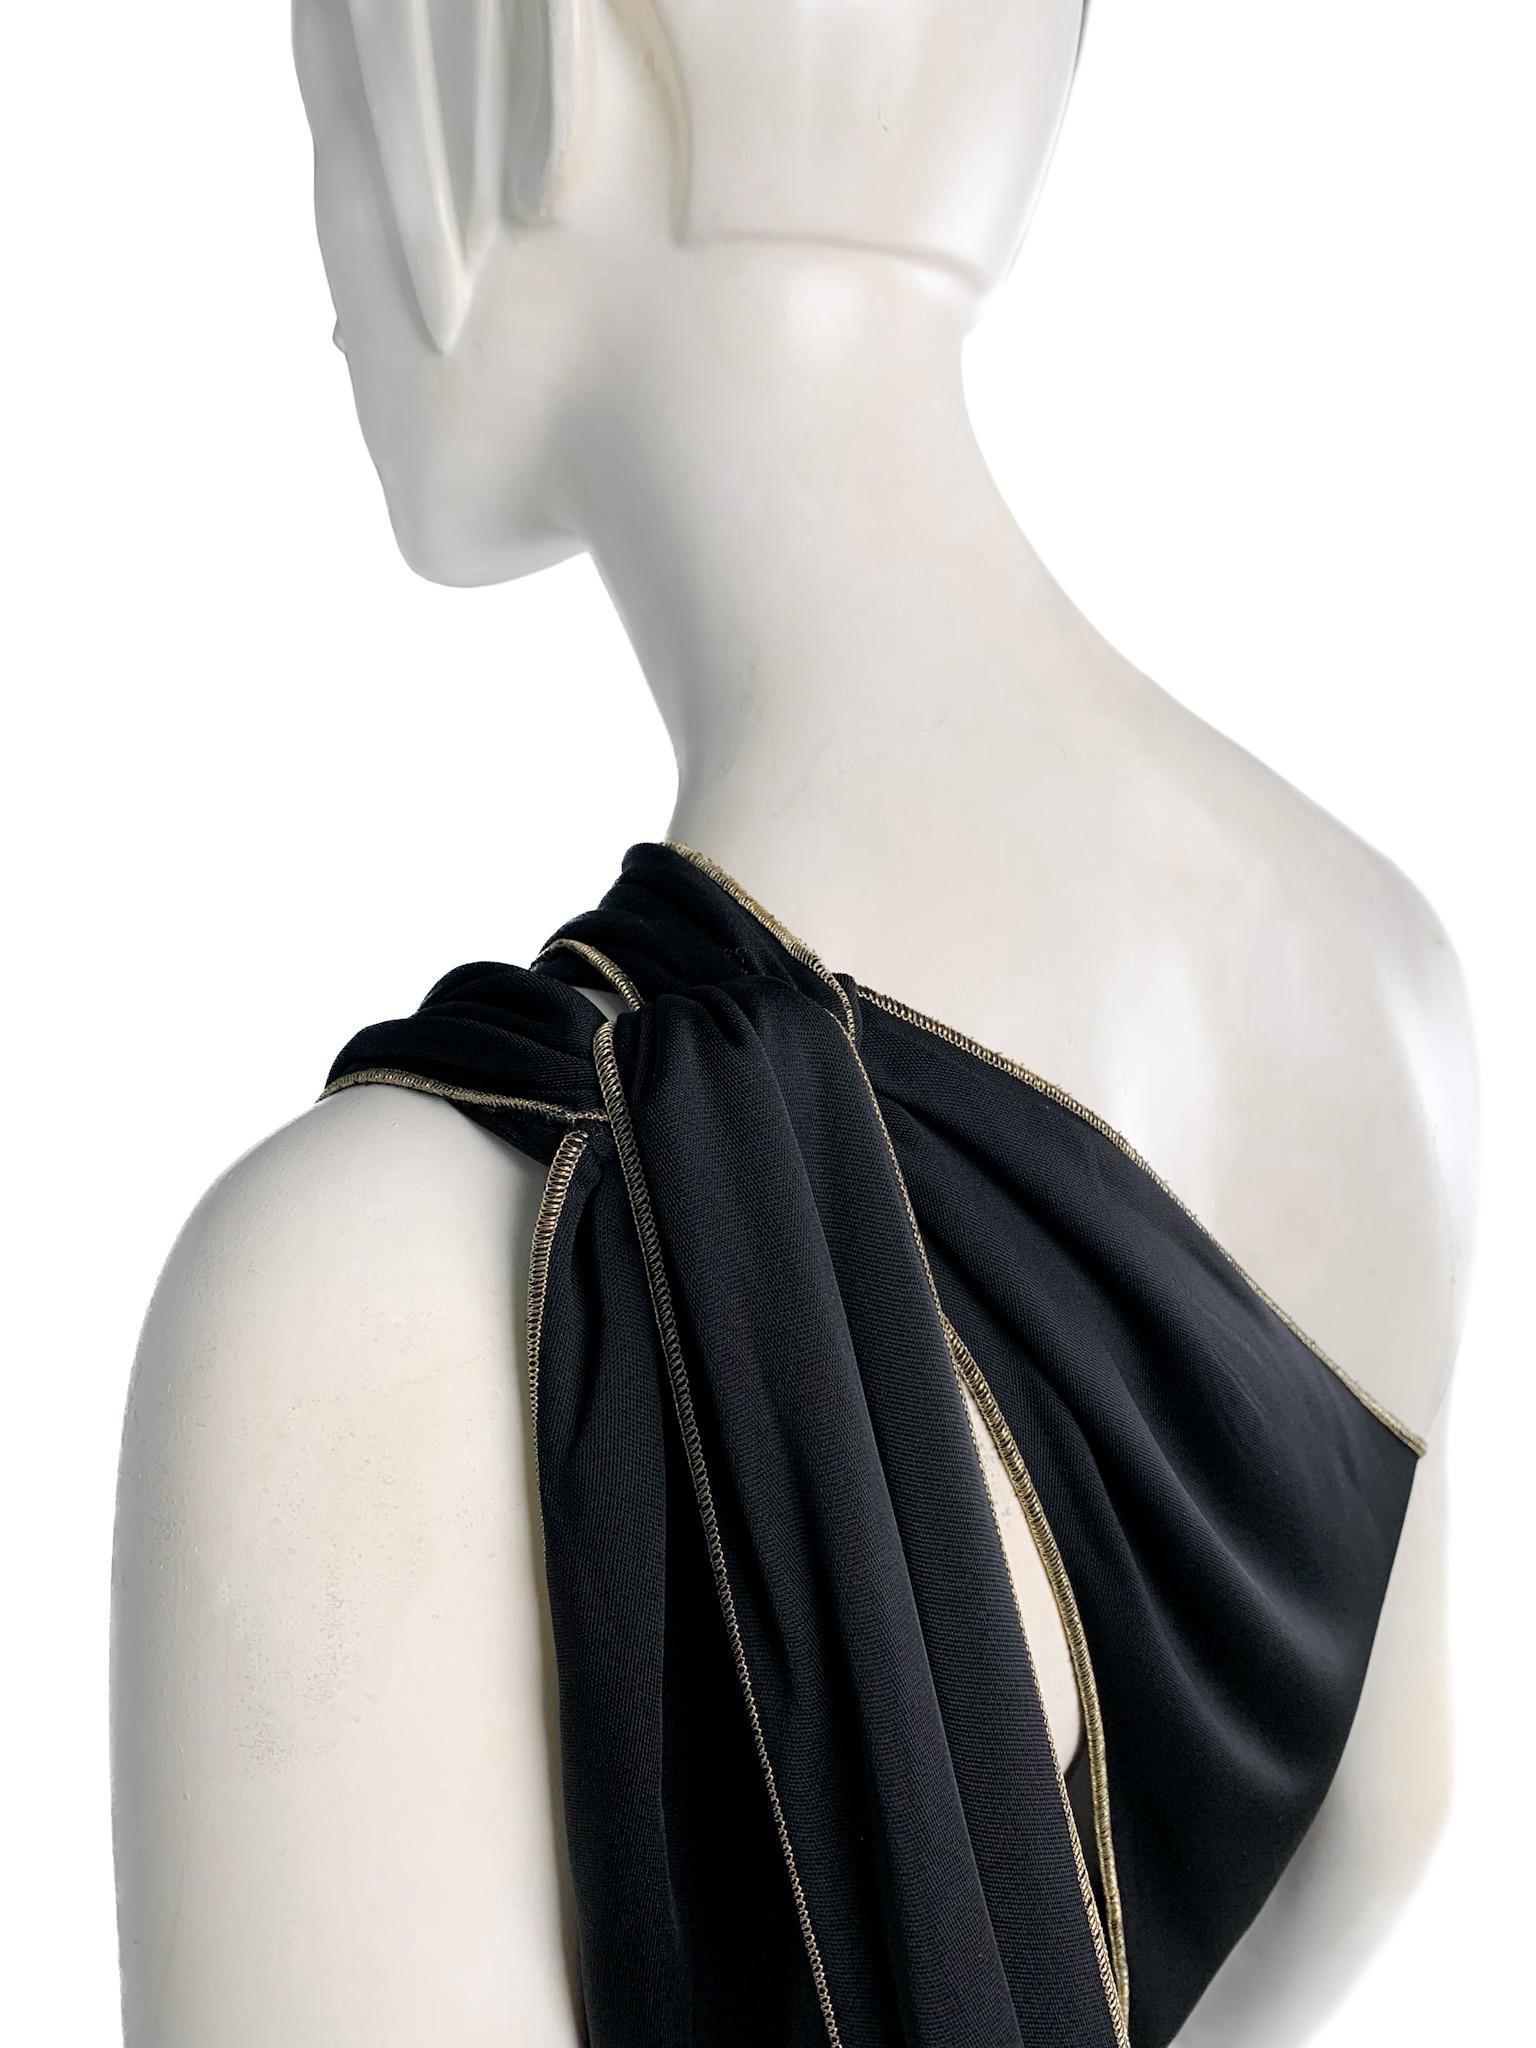 Gucci 2006 One-Shoulder Gown with Fringed Scarves/Train, Cutouts, Gold Topstitch 7